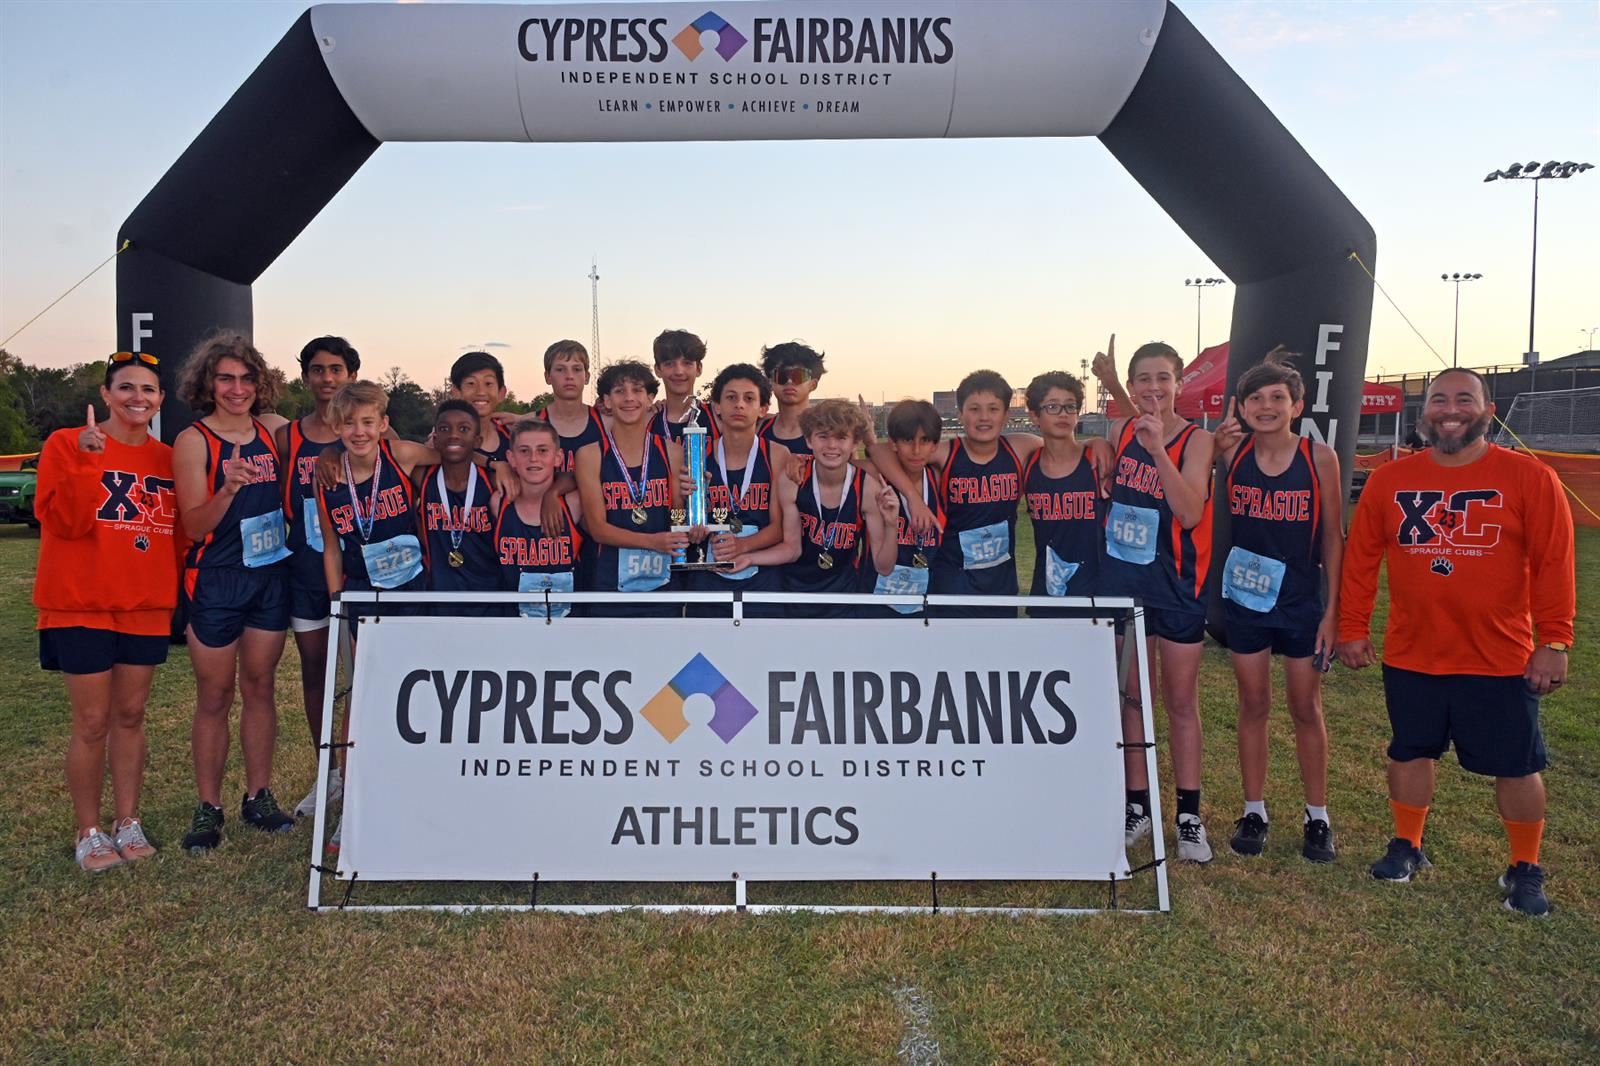 Anthony, Salyards, Sprague win district middle school cross country team titles.